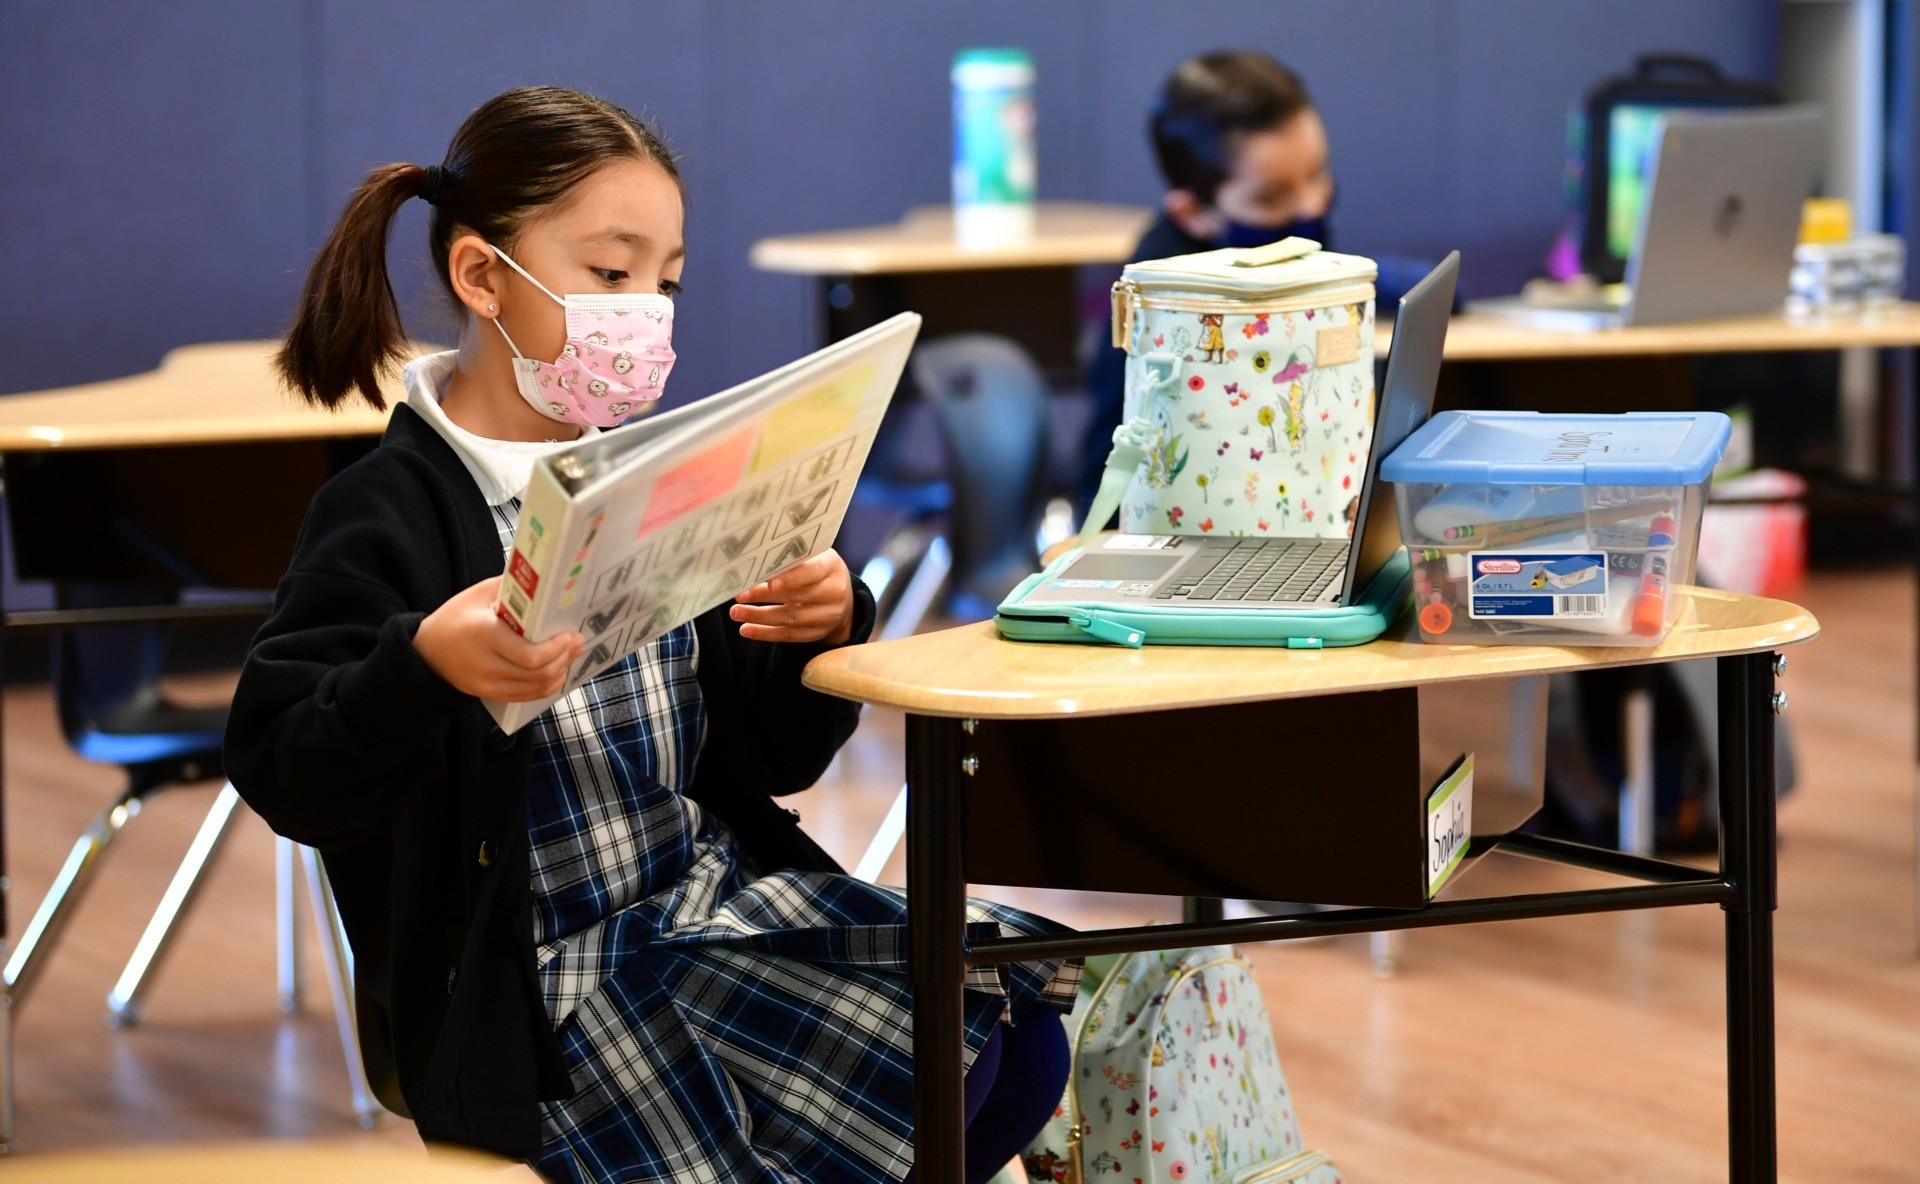 First grade students prepare for class at St. Joseph Catholic School in La Puente, California on November 16, 2020, where pre-kindergarten to Second Grade students in need of special services returned to the classroom today for in-person instruction. - The campus is the second Catholic school in Los Angeles County to receive a waiver approval to reopen as the coronavirus pandemic rages on. The US surpassed 11 million coronavirus cases Sunday, adding one million new cases in less than a week, according to a tally by Johns Hopkins University. (Photo by Frederic J. BROWN / AFP) (Photo by FREDERIC J. BROWN/AFP via Getty Images)